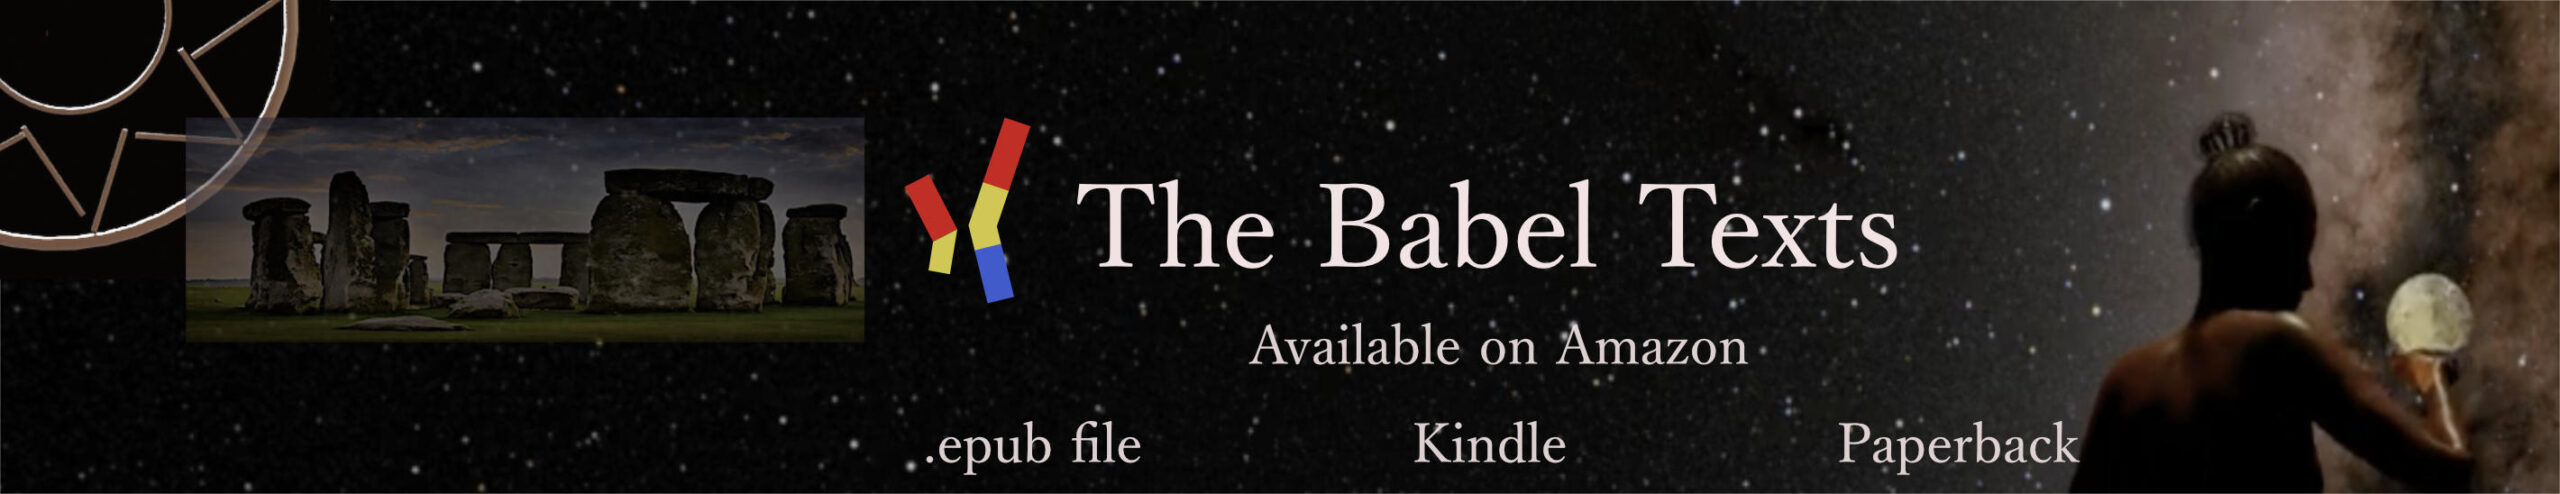 The Babel Texts Available as .epub file, Kindle file, and in paperback editions